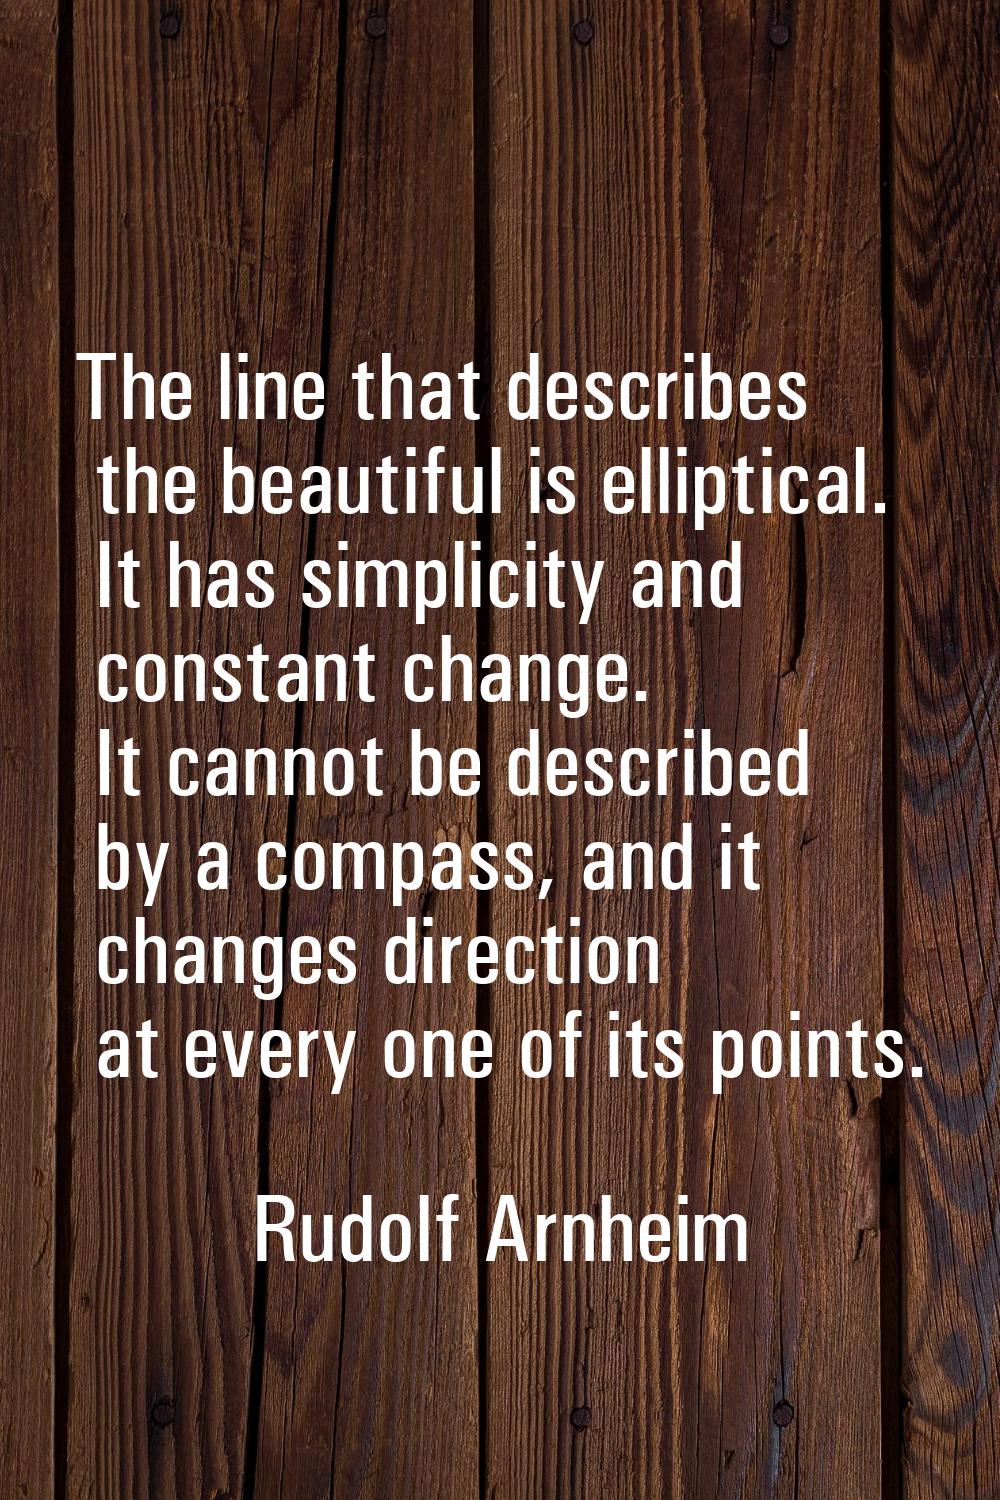 The line that describes the beautiful is elliptical. It has simplicity and constant change. It cann